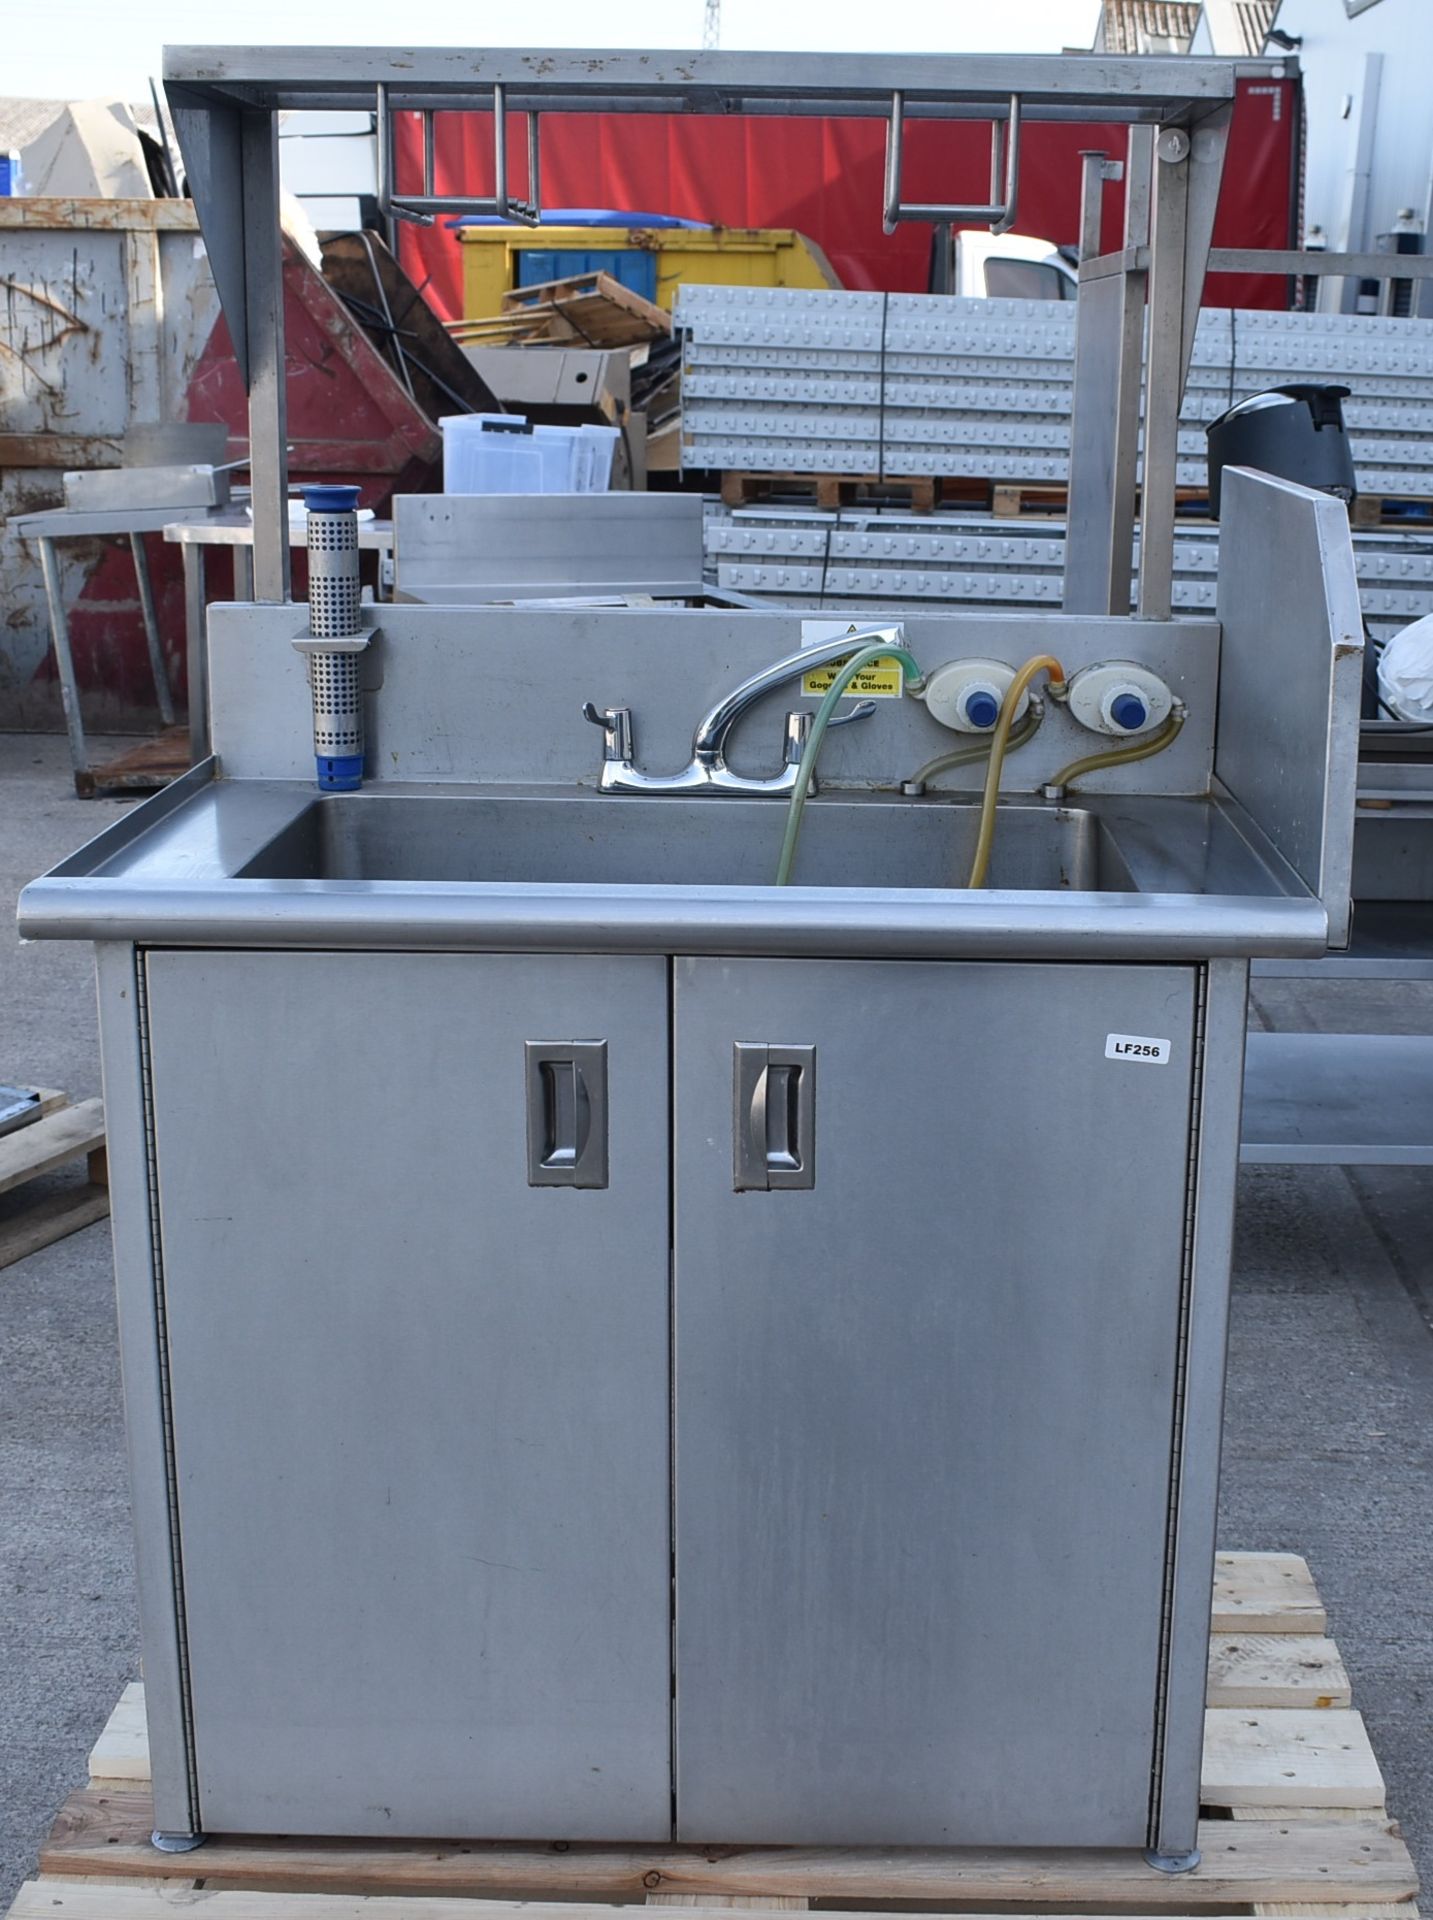 1 x Commercial Wash Unit With Large Rectangular Basin Over a Storage Cupboard, Mixer Taps, Splash